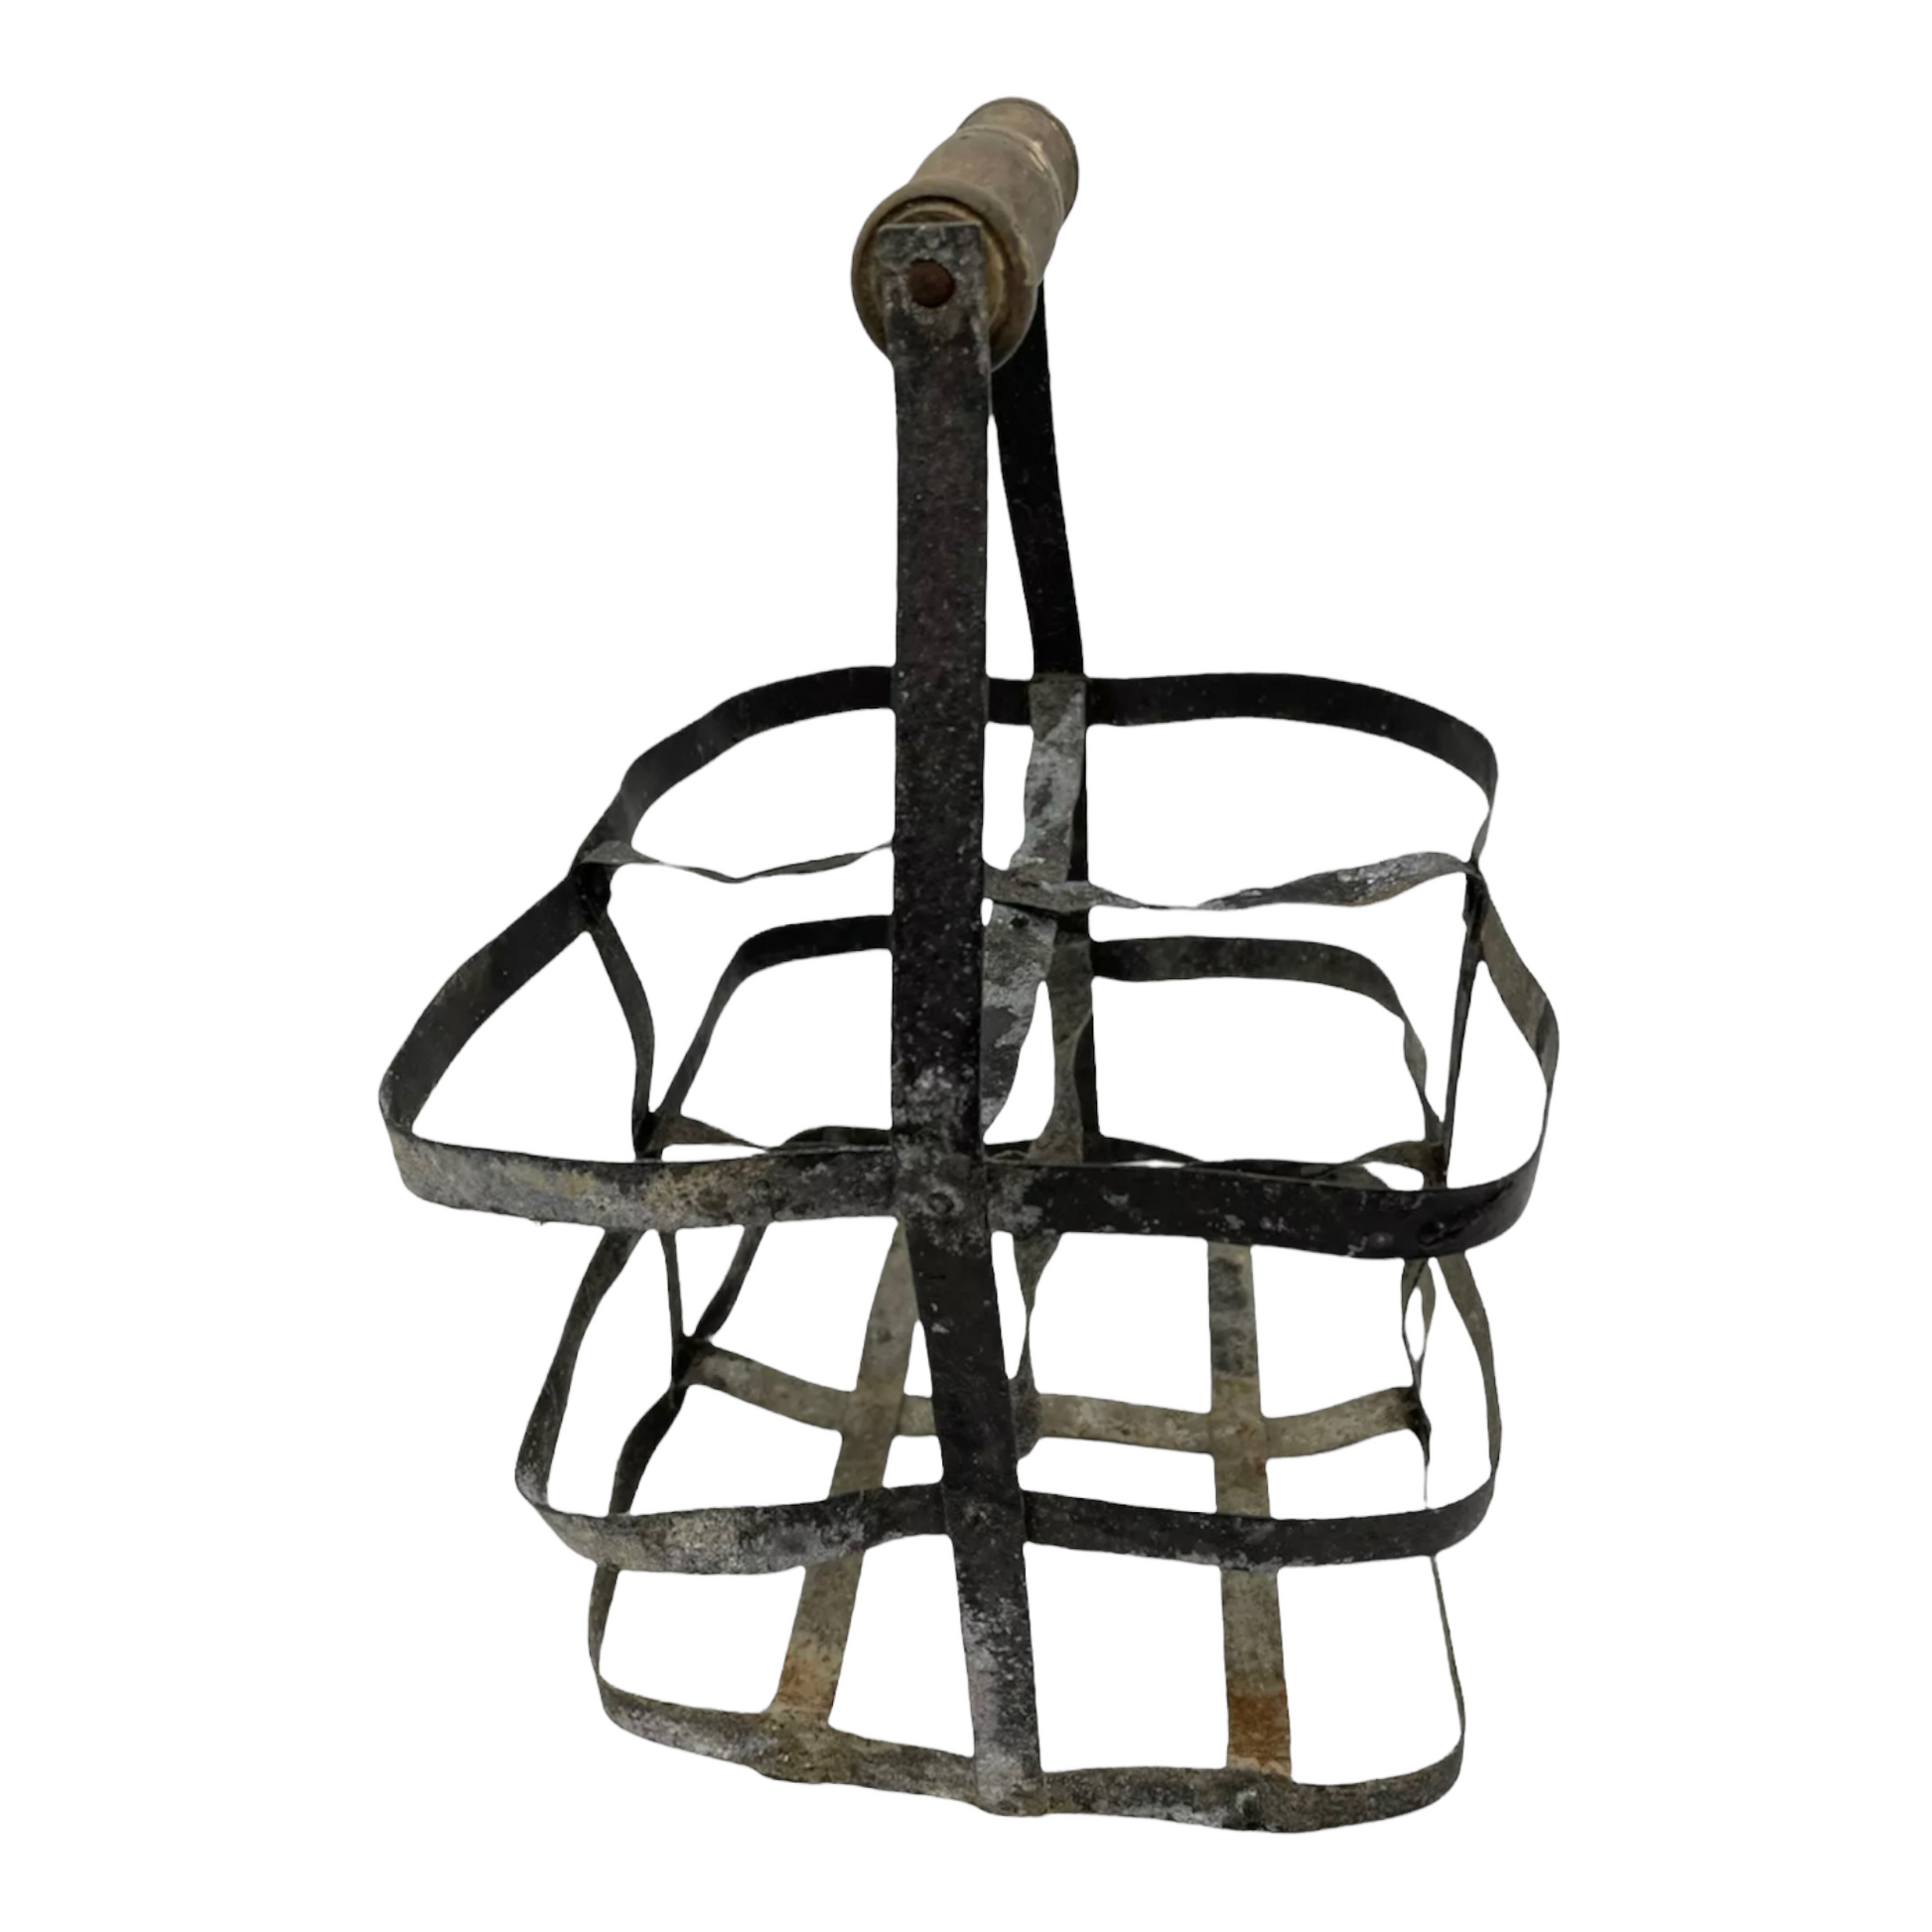 French vintage milk botle wine bottle carrier sold by All Things French Store